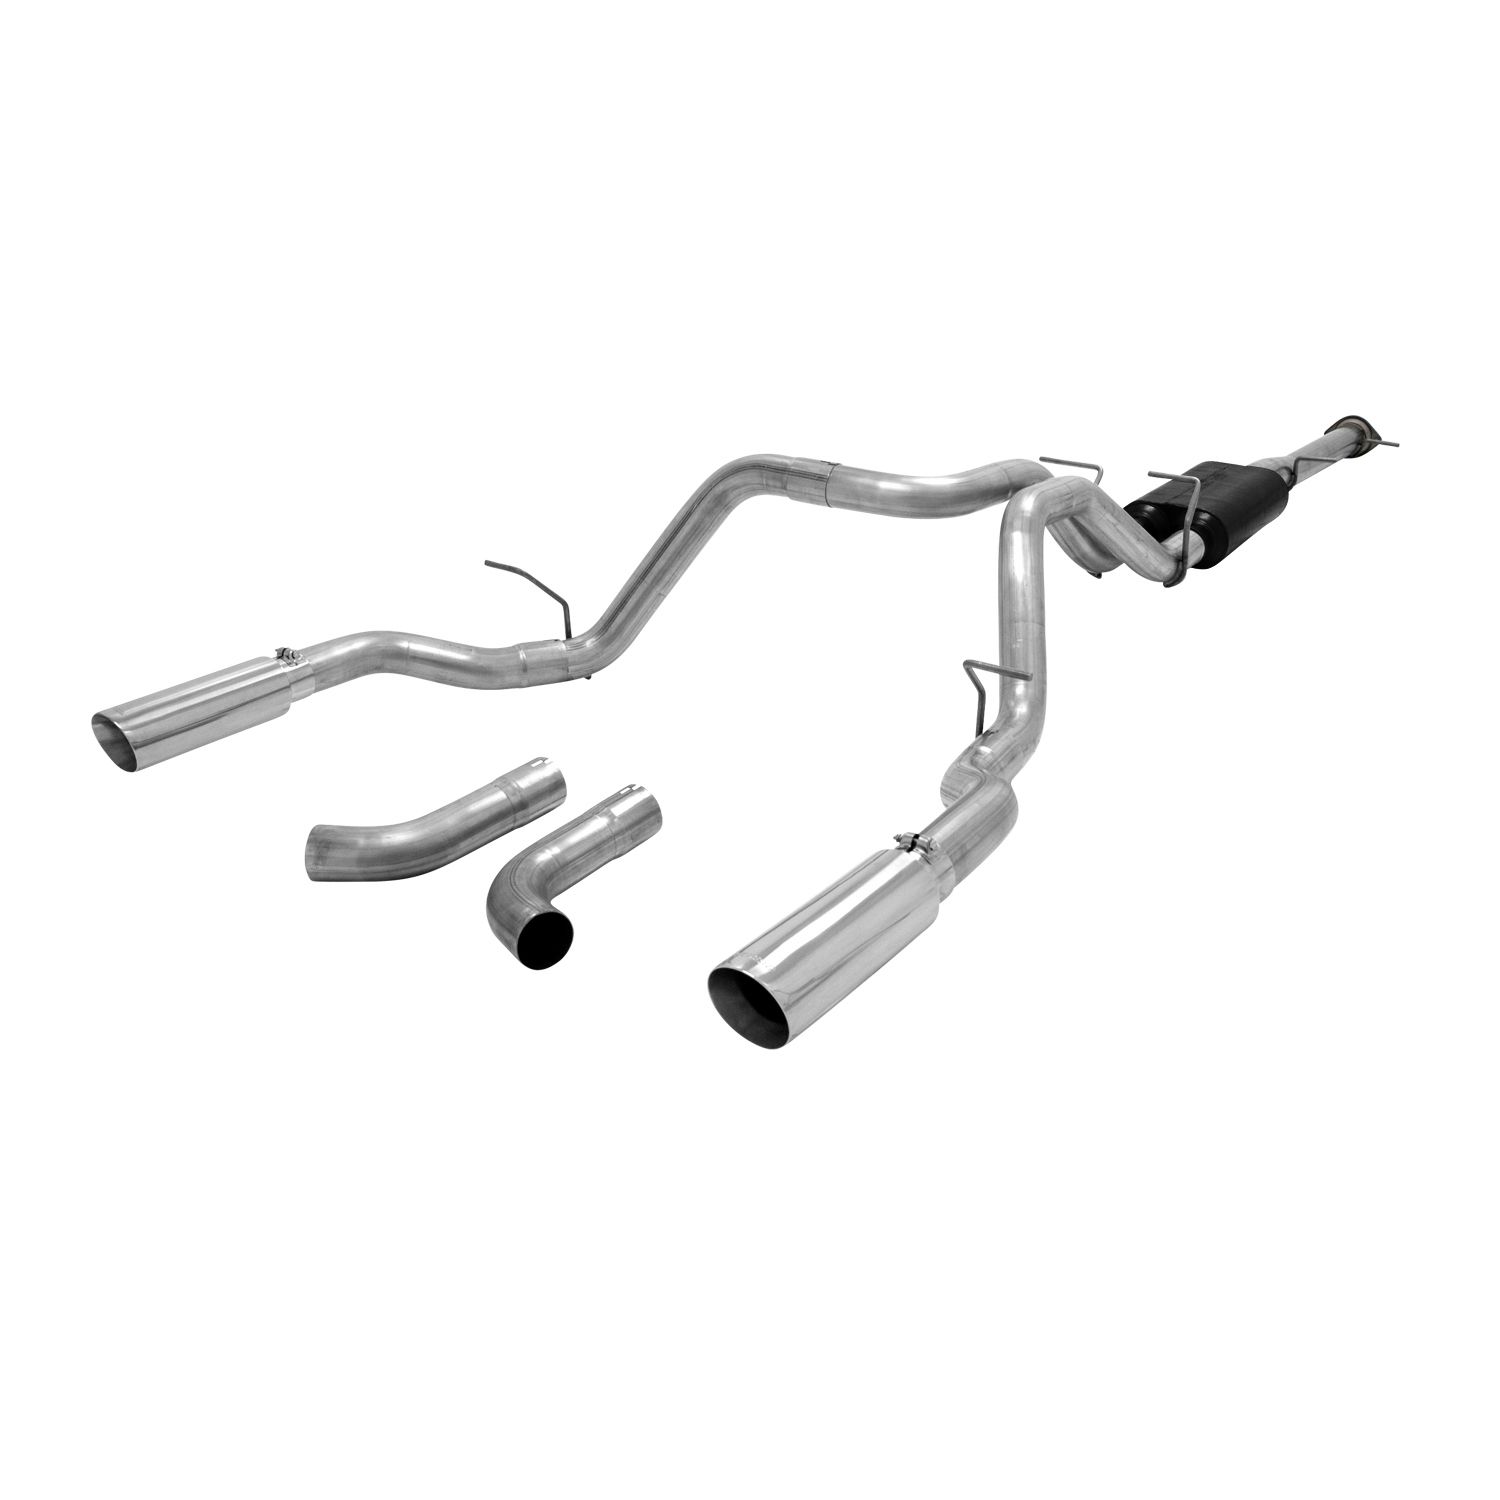 2016-2019 Chevrolet Silverado 2500 HD High Country/LT/LTZ/WT 6.0L Crew Cab Flowmaster American Thunder Cat-Back Exhaust 78.8 inch Bed - 817541